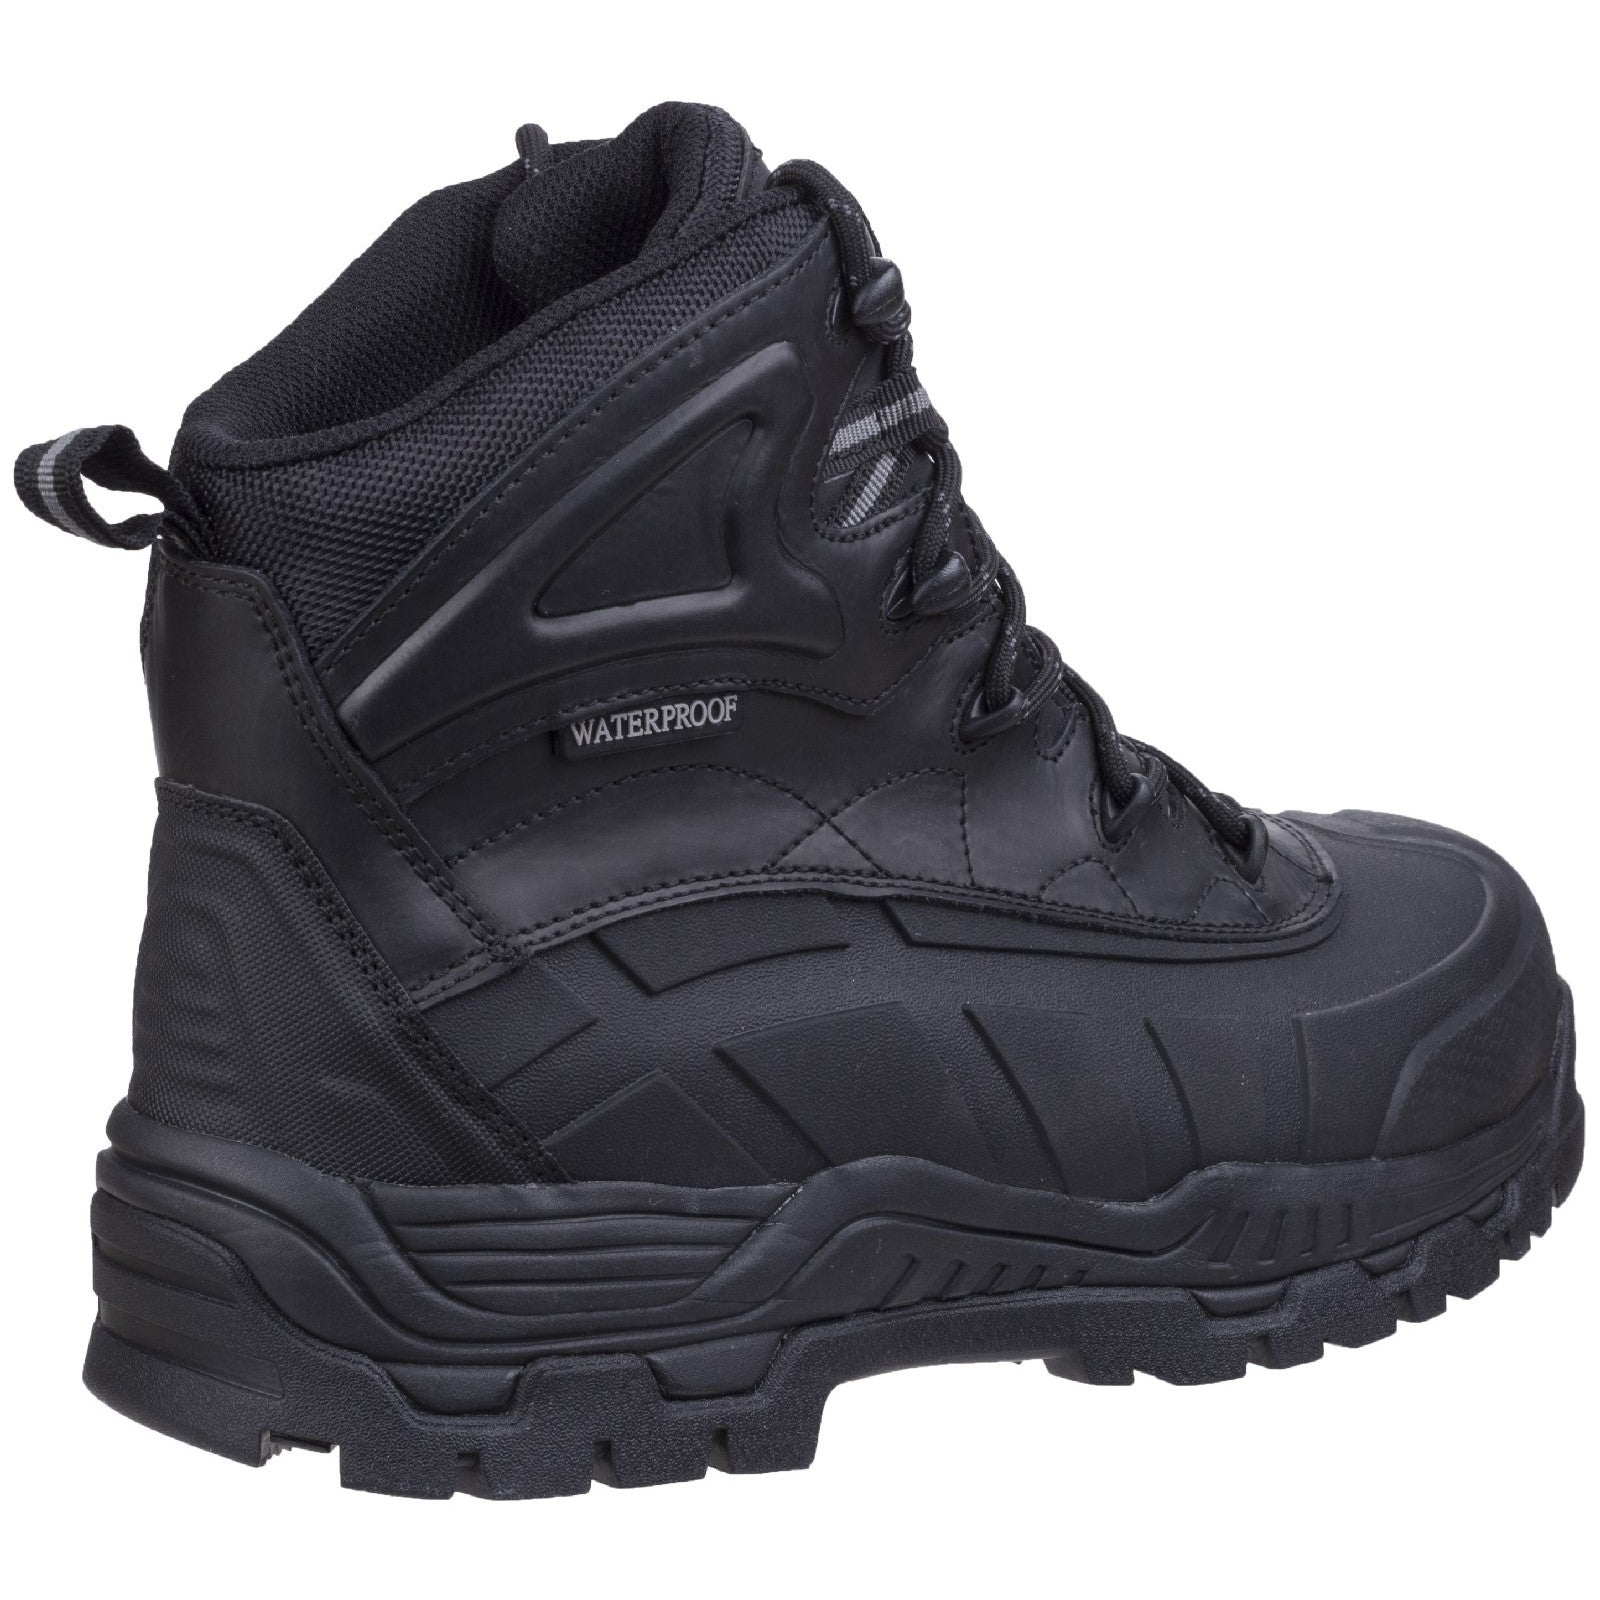 Amblers FS430 Hybrid Waterproof Non-Metal Safety Boot